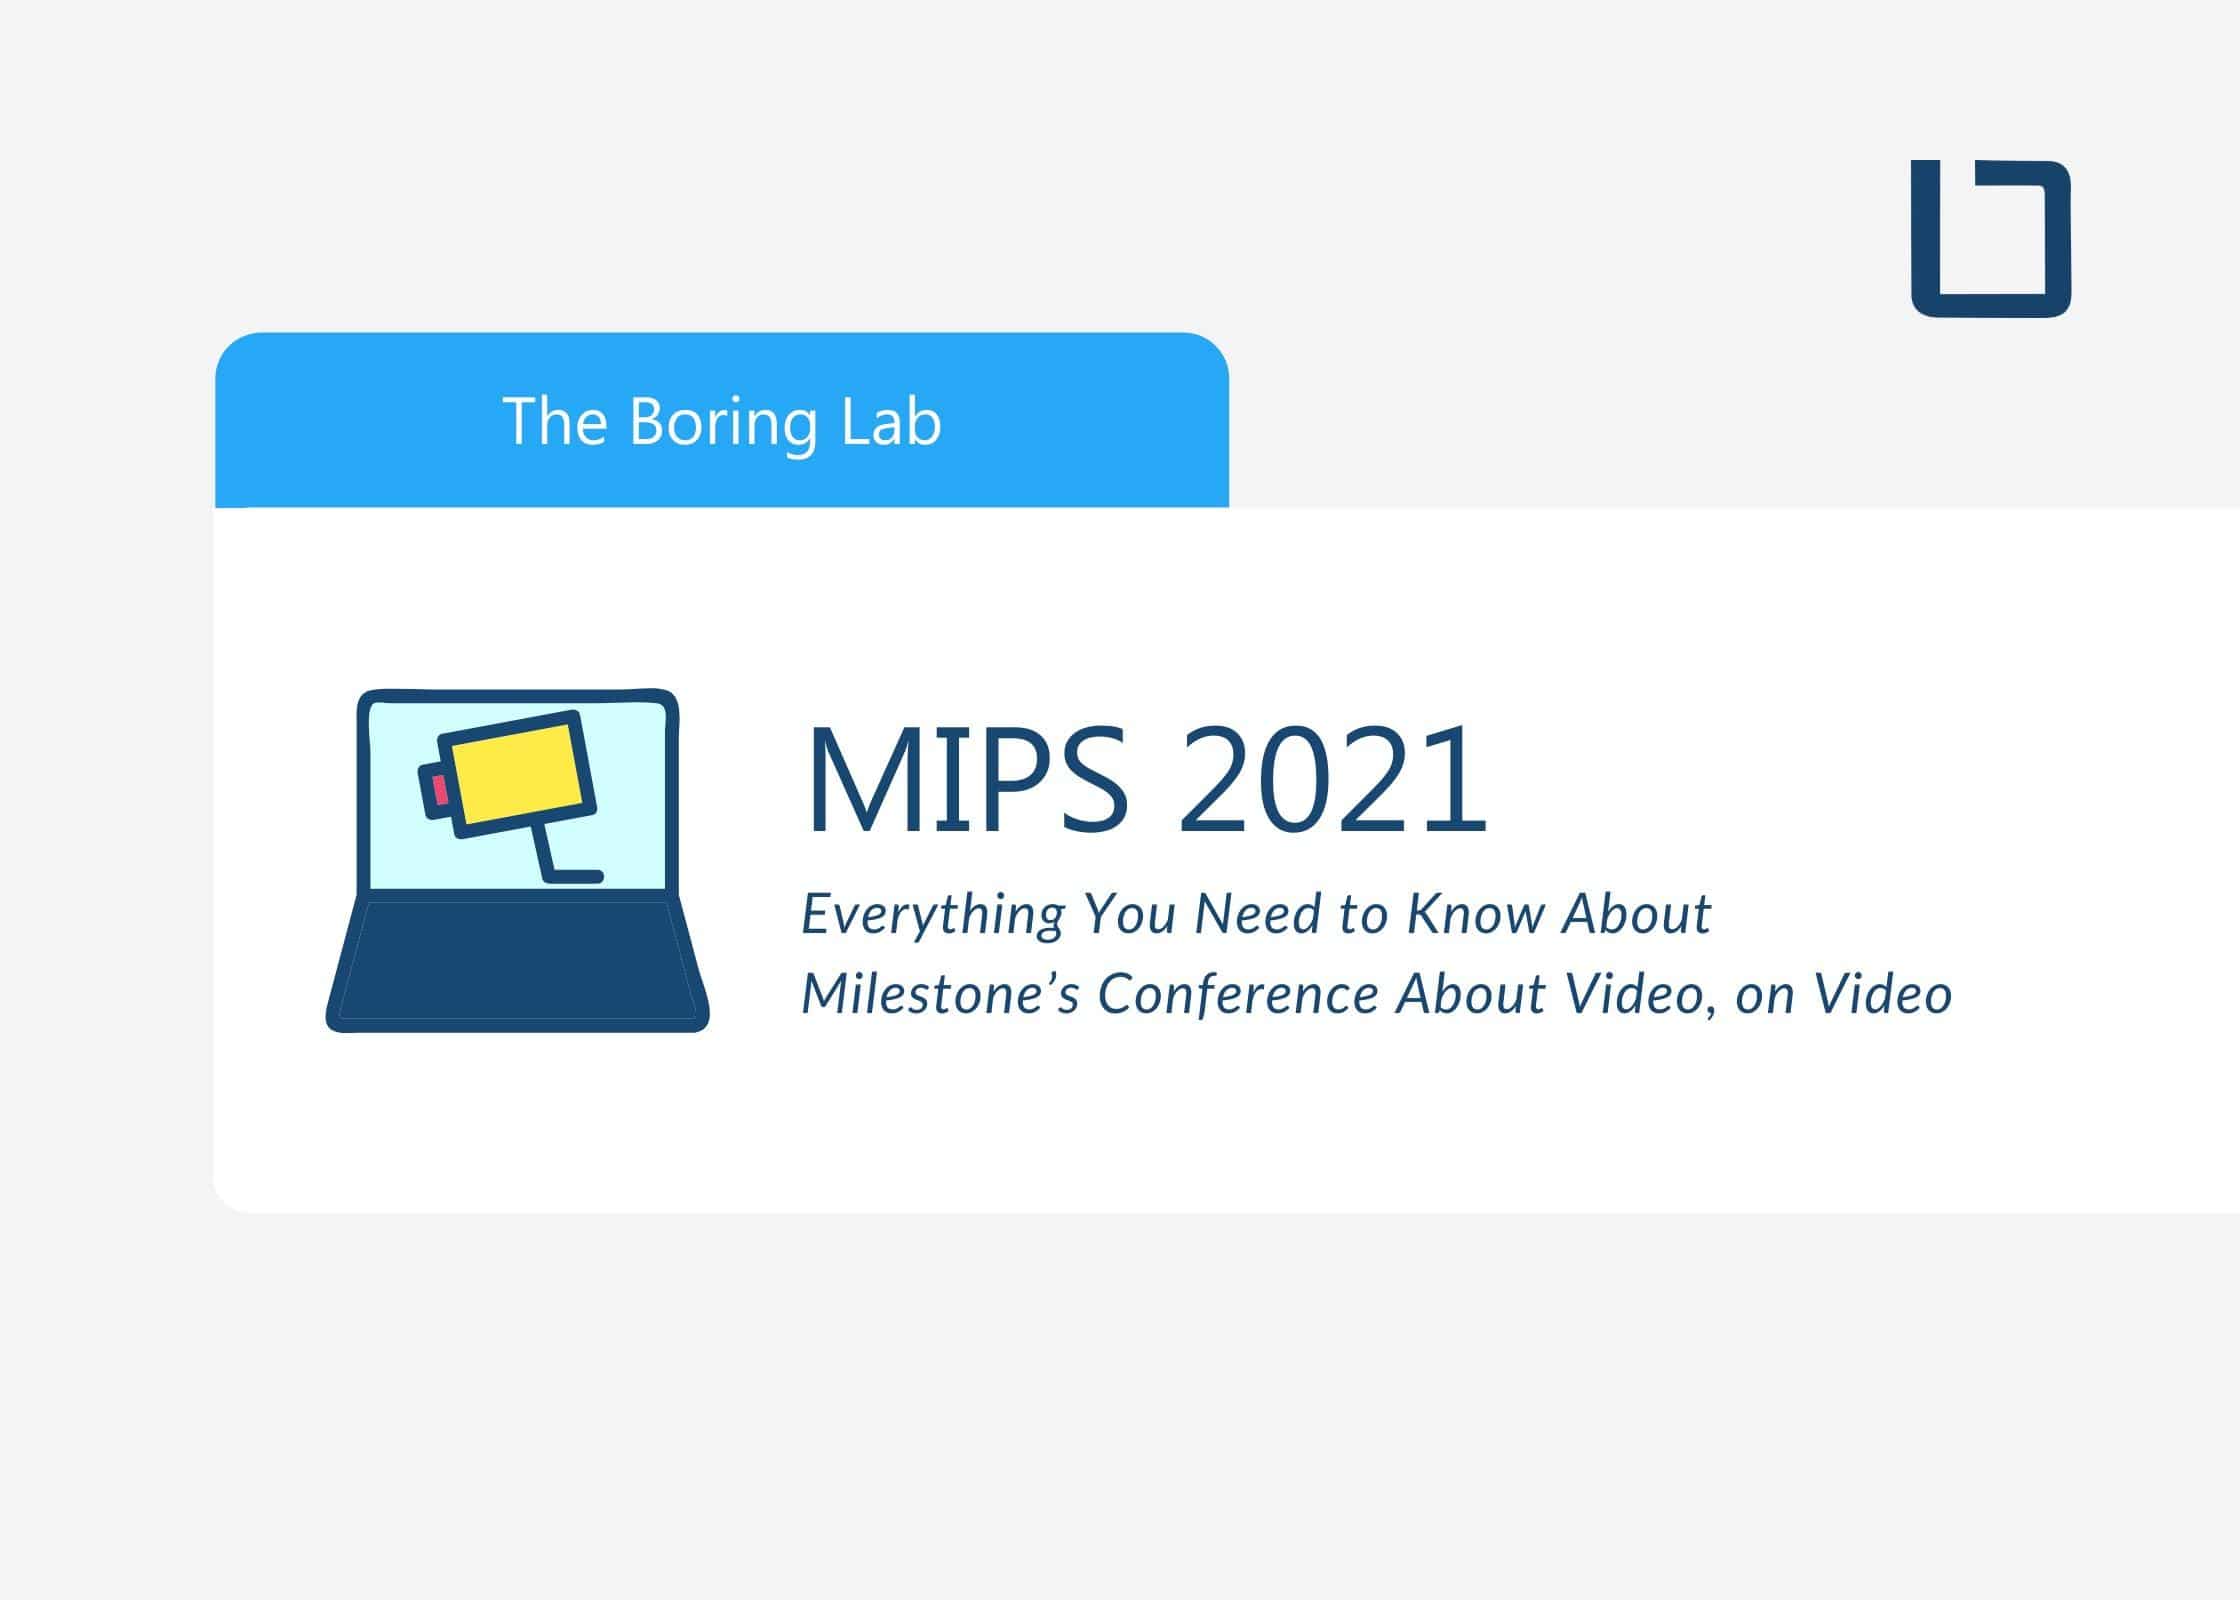 MIPS 2021: Everything You Need to Know About Milestone’s Conference About Video, on Video